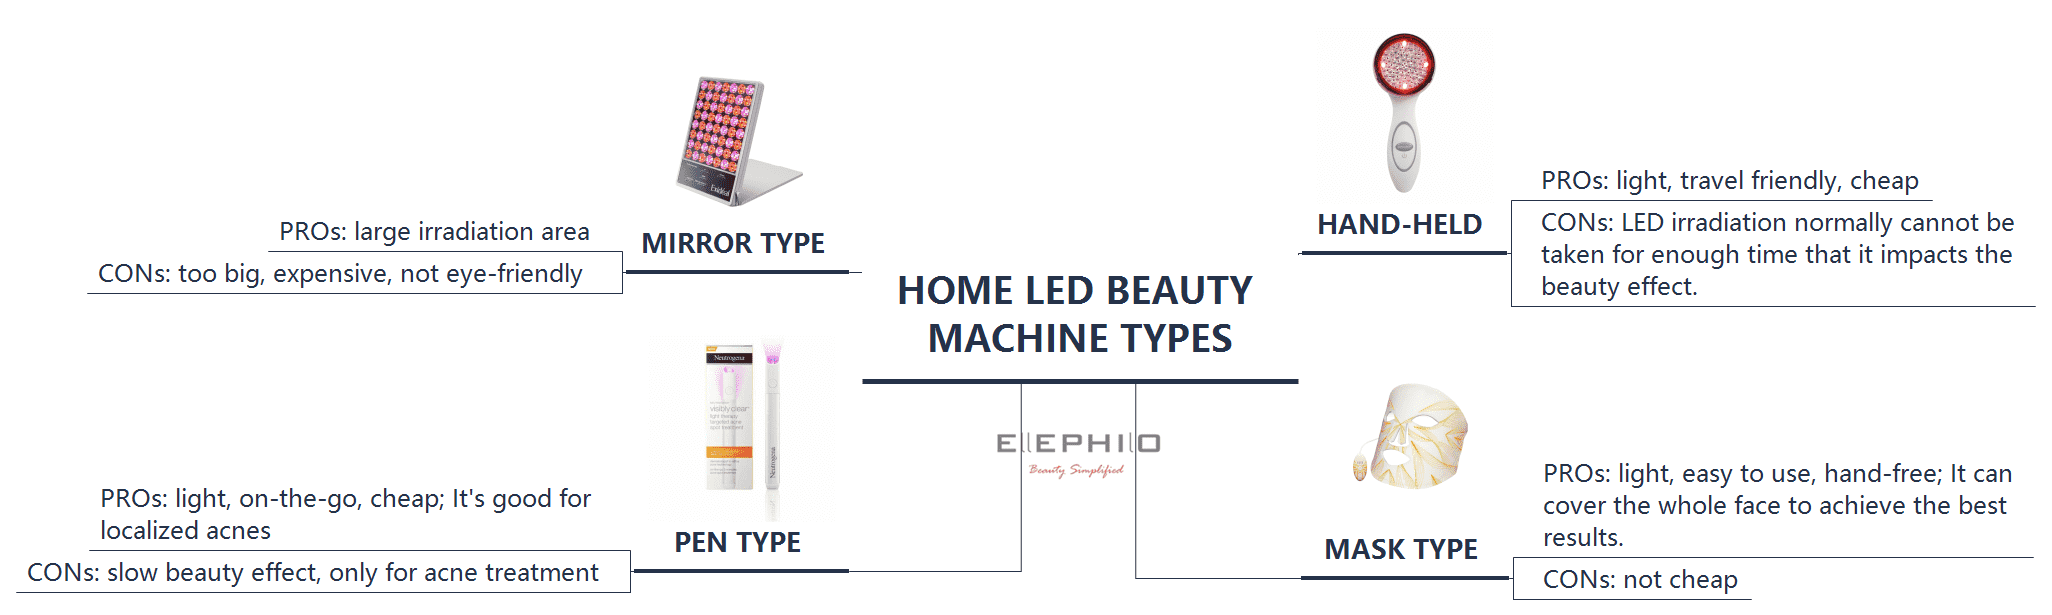 LED Beauty Machine Types for Home Use